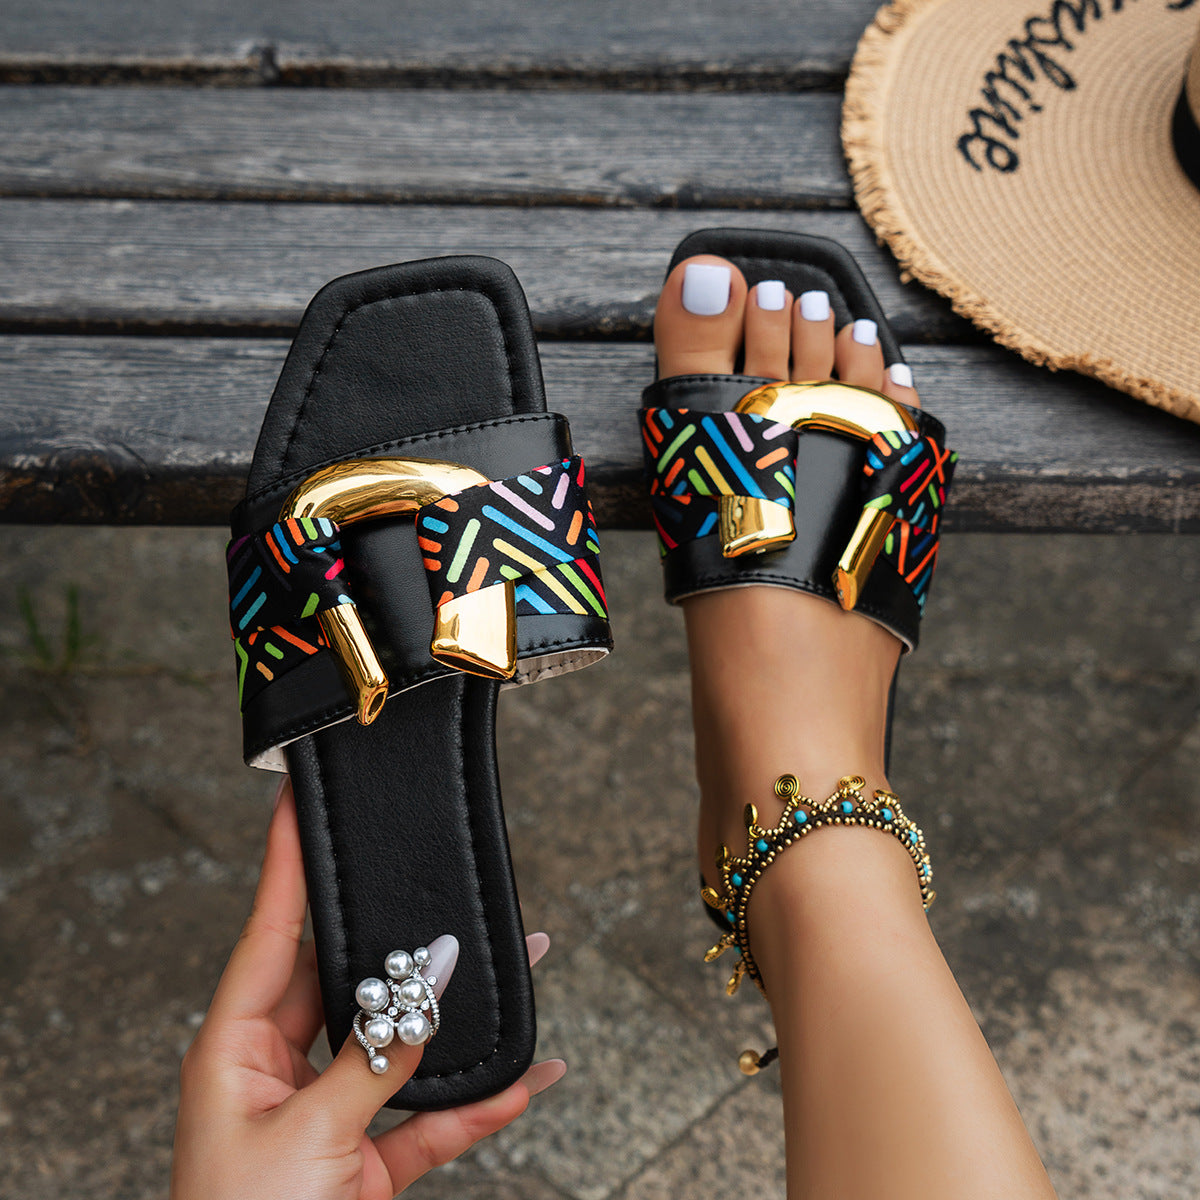 sandals  | Square Toe Flat Sandals Metal Buckle Slippers Summer Beach Shoes Women | Black |  Size36| thecurvestory.myshopify.com